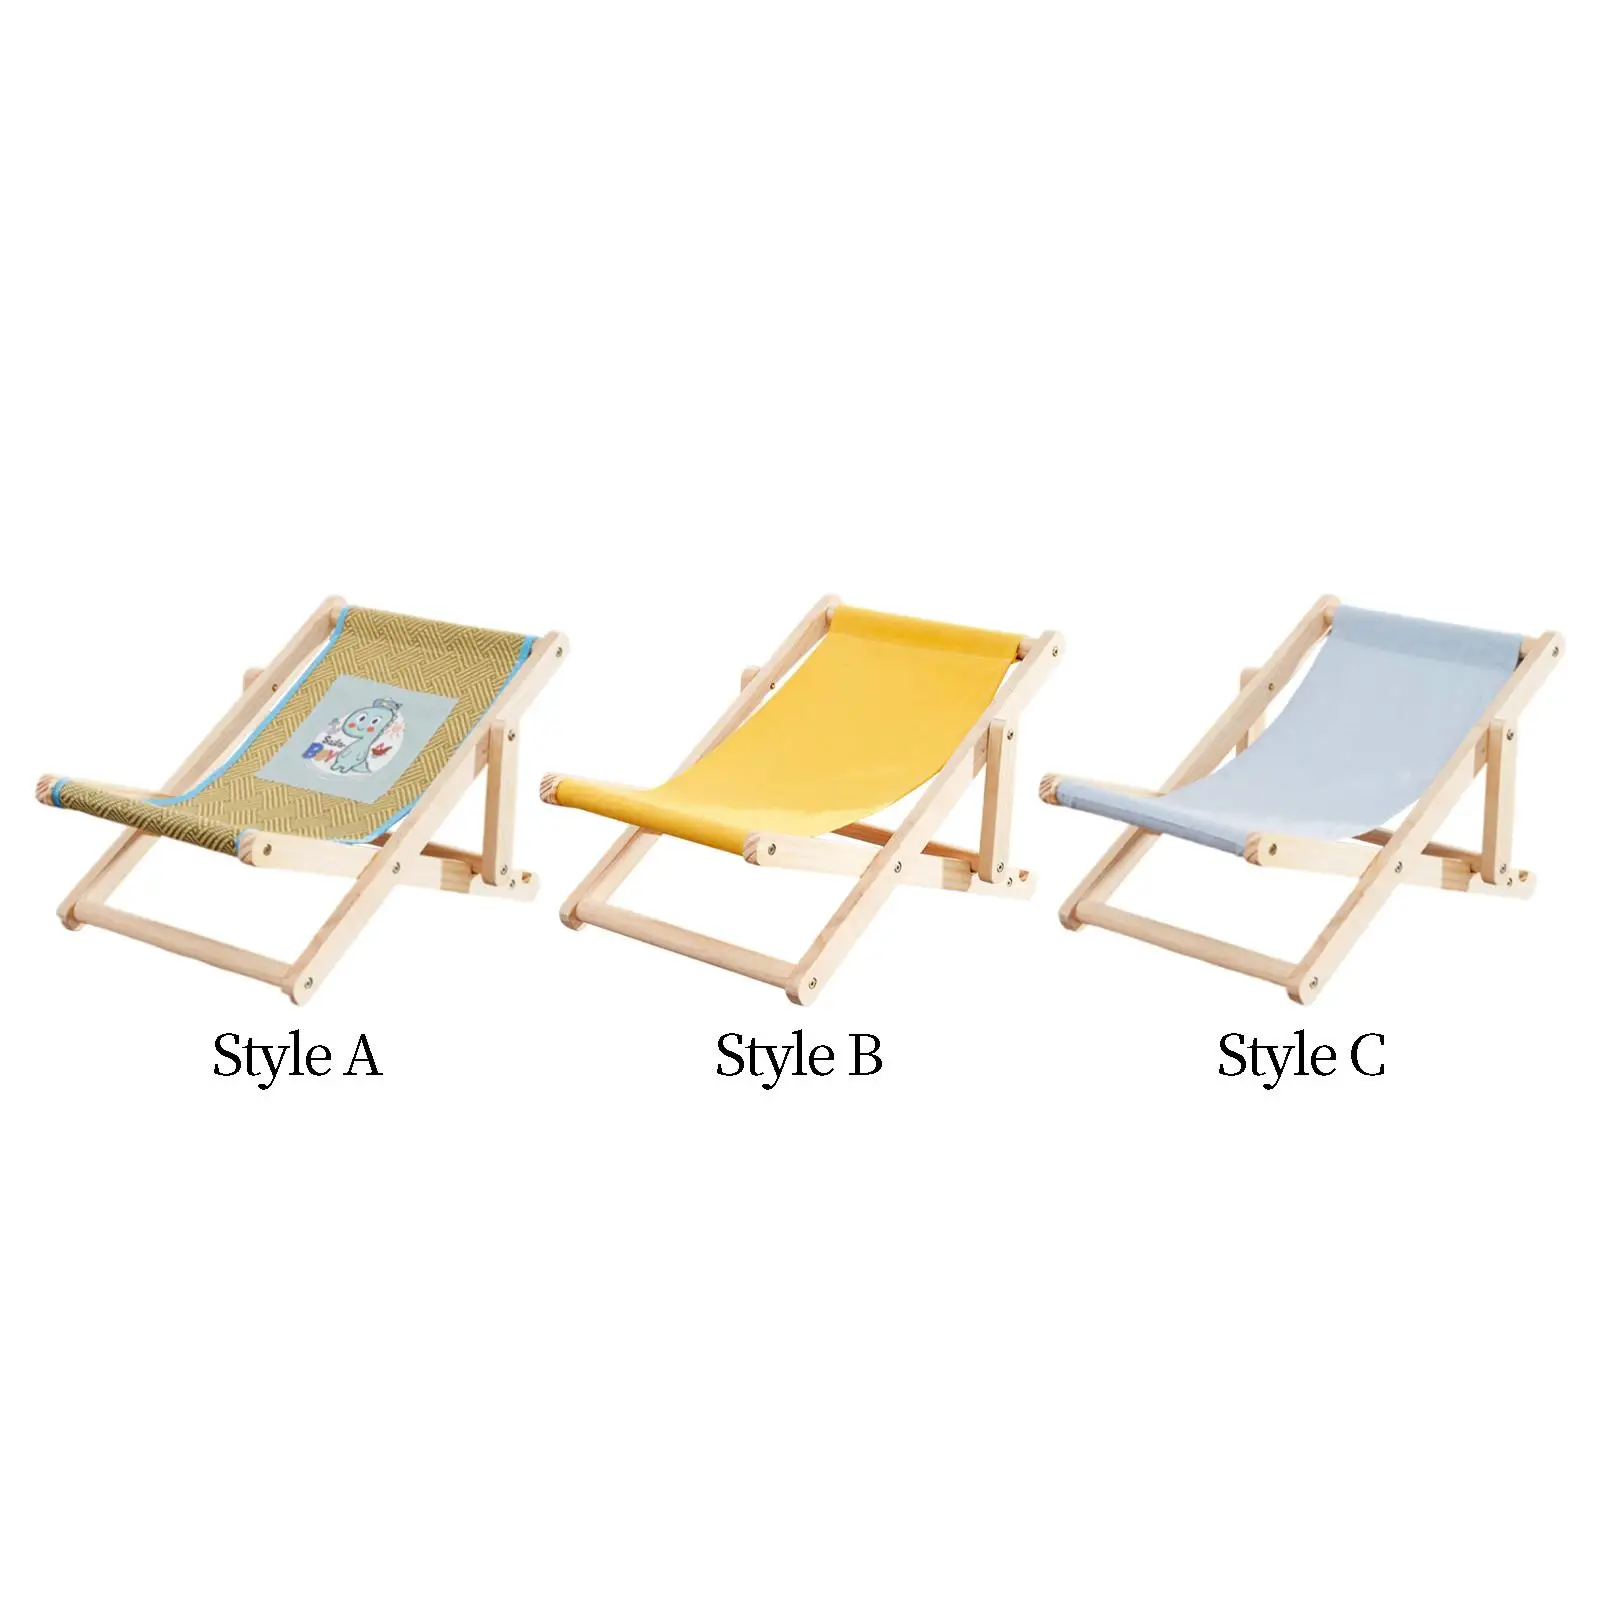 Scratcher Bed Multifunctional Casual Chair Anti Slip Legs Sturdy Adjustable Height fors